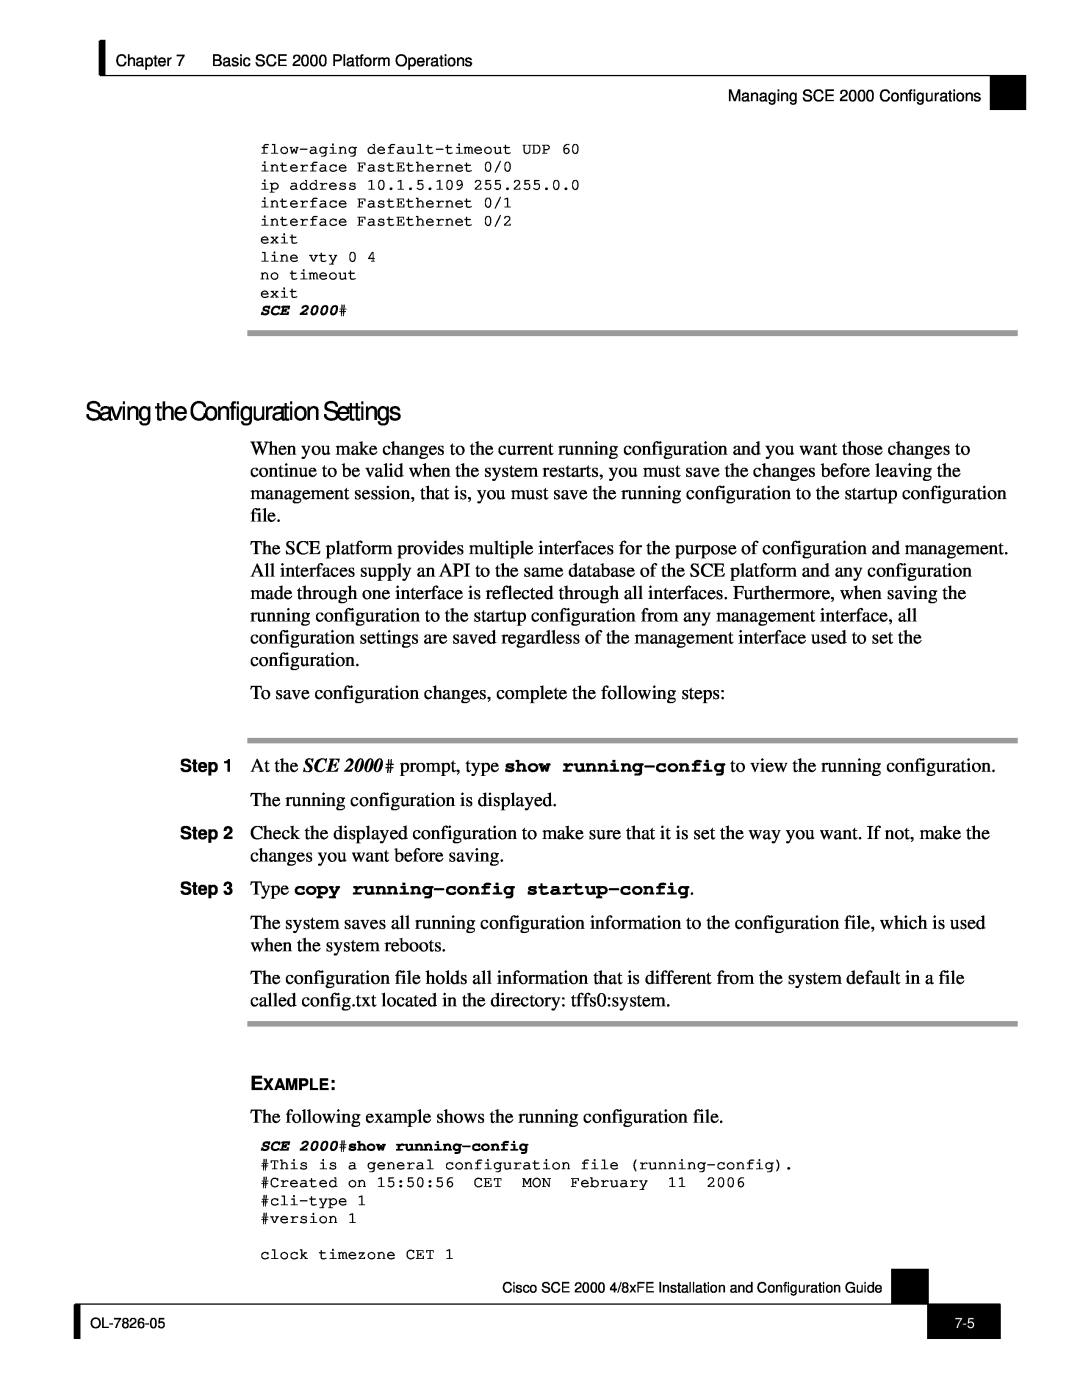 Cisco Systems SCE 2000 4/8xFE manual Saving the Configuration Settings, Type copy running-config startup-config 